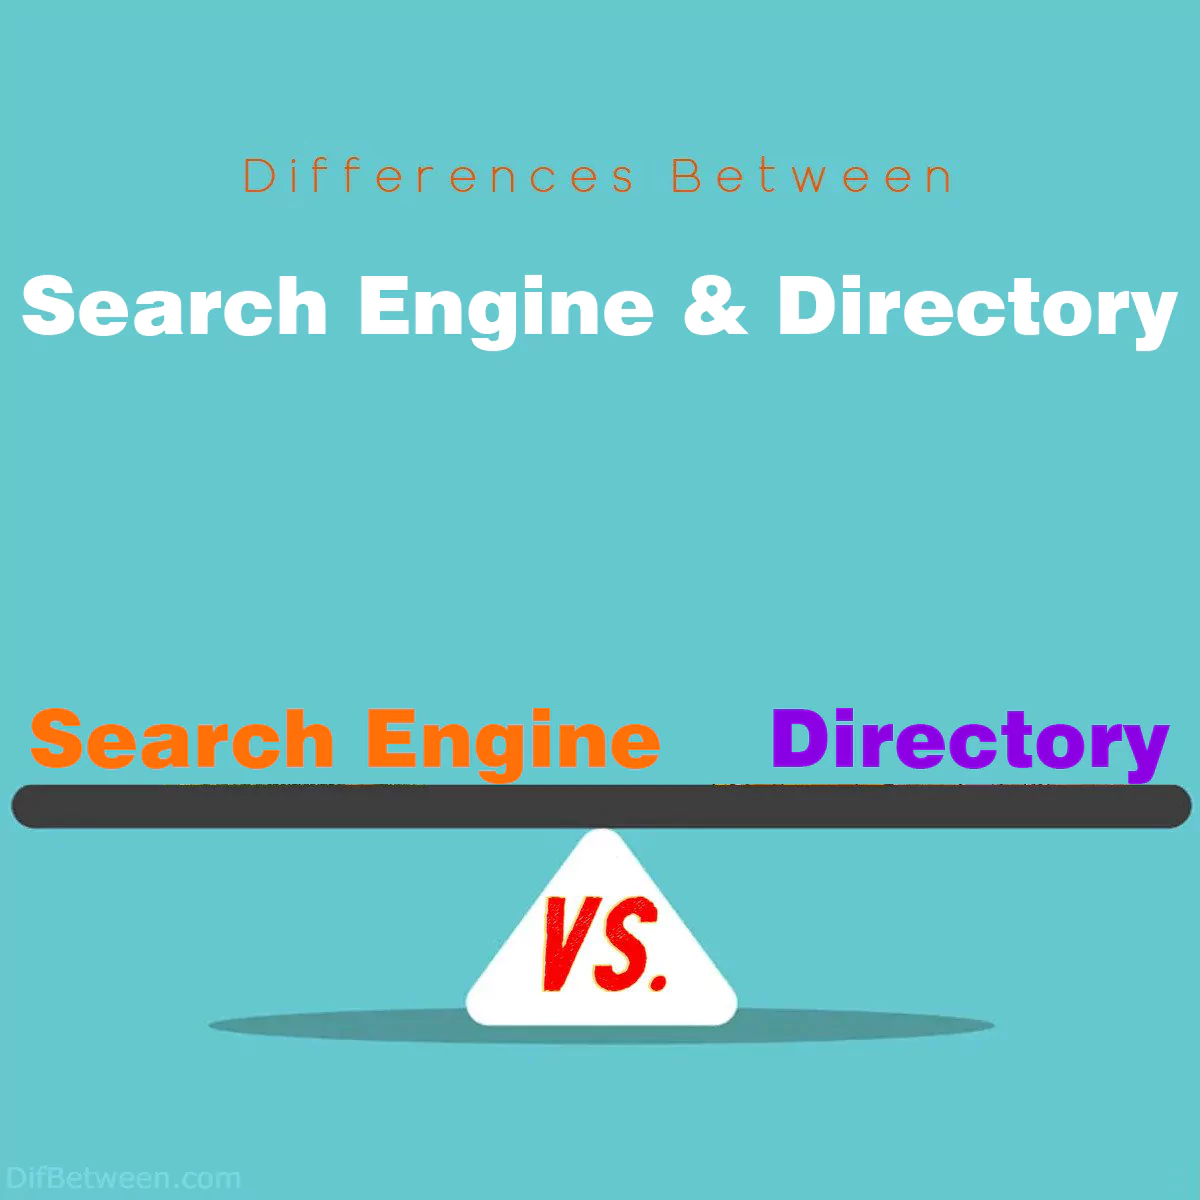 Differences Between Search Engine and Directory